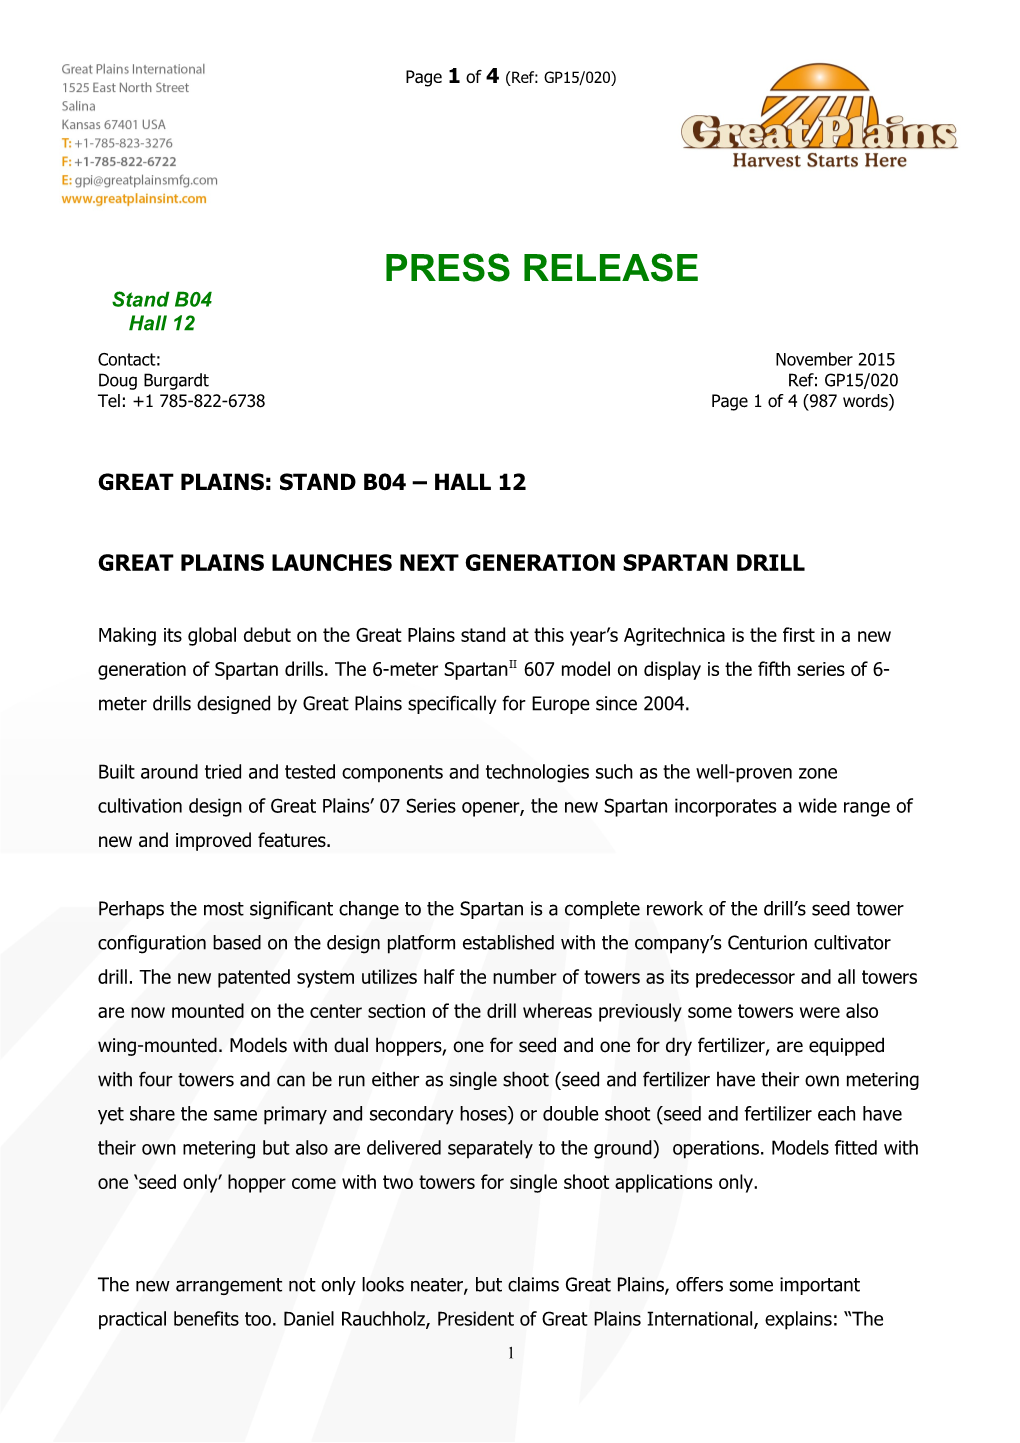 Great Plains Launches Next Generation Spartan Drill